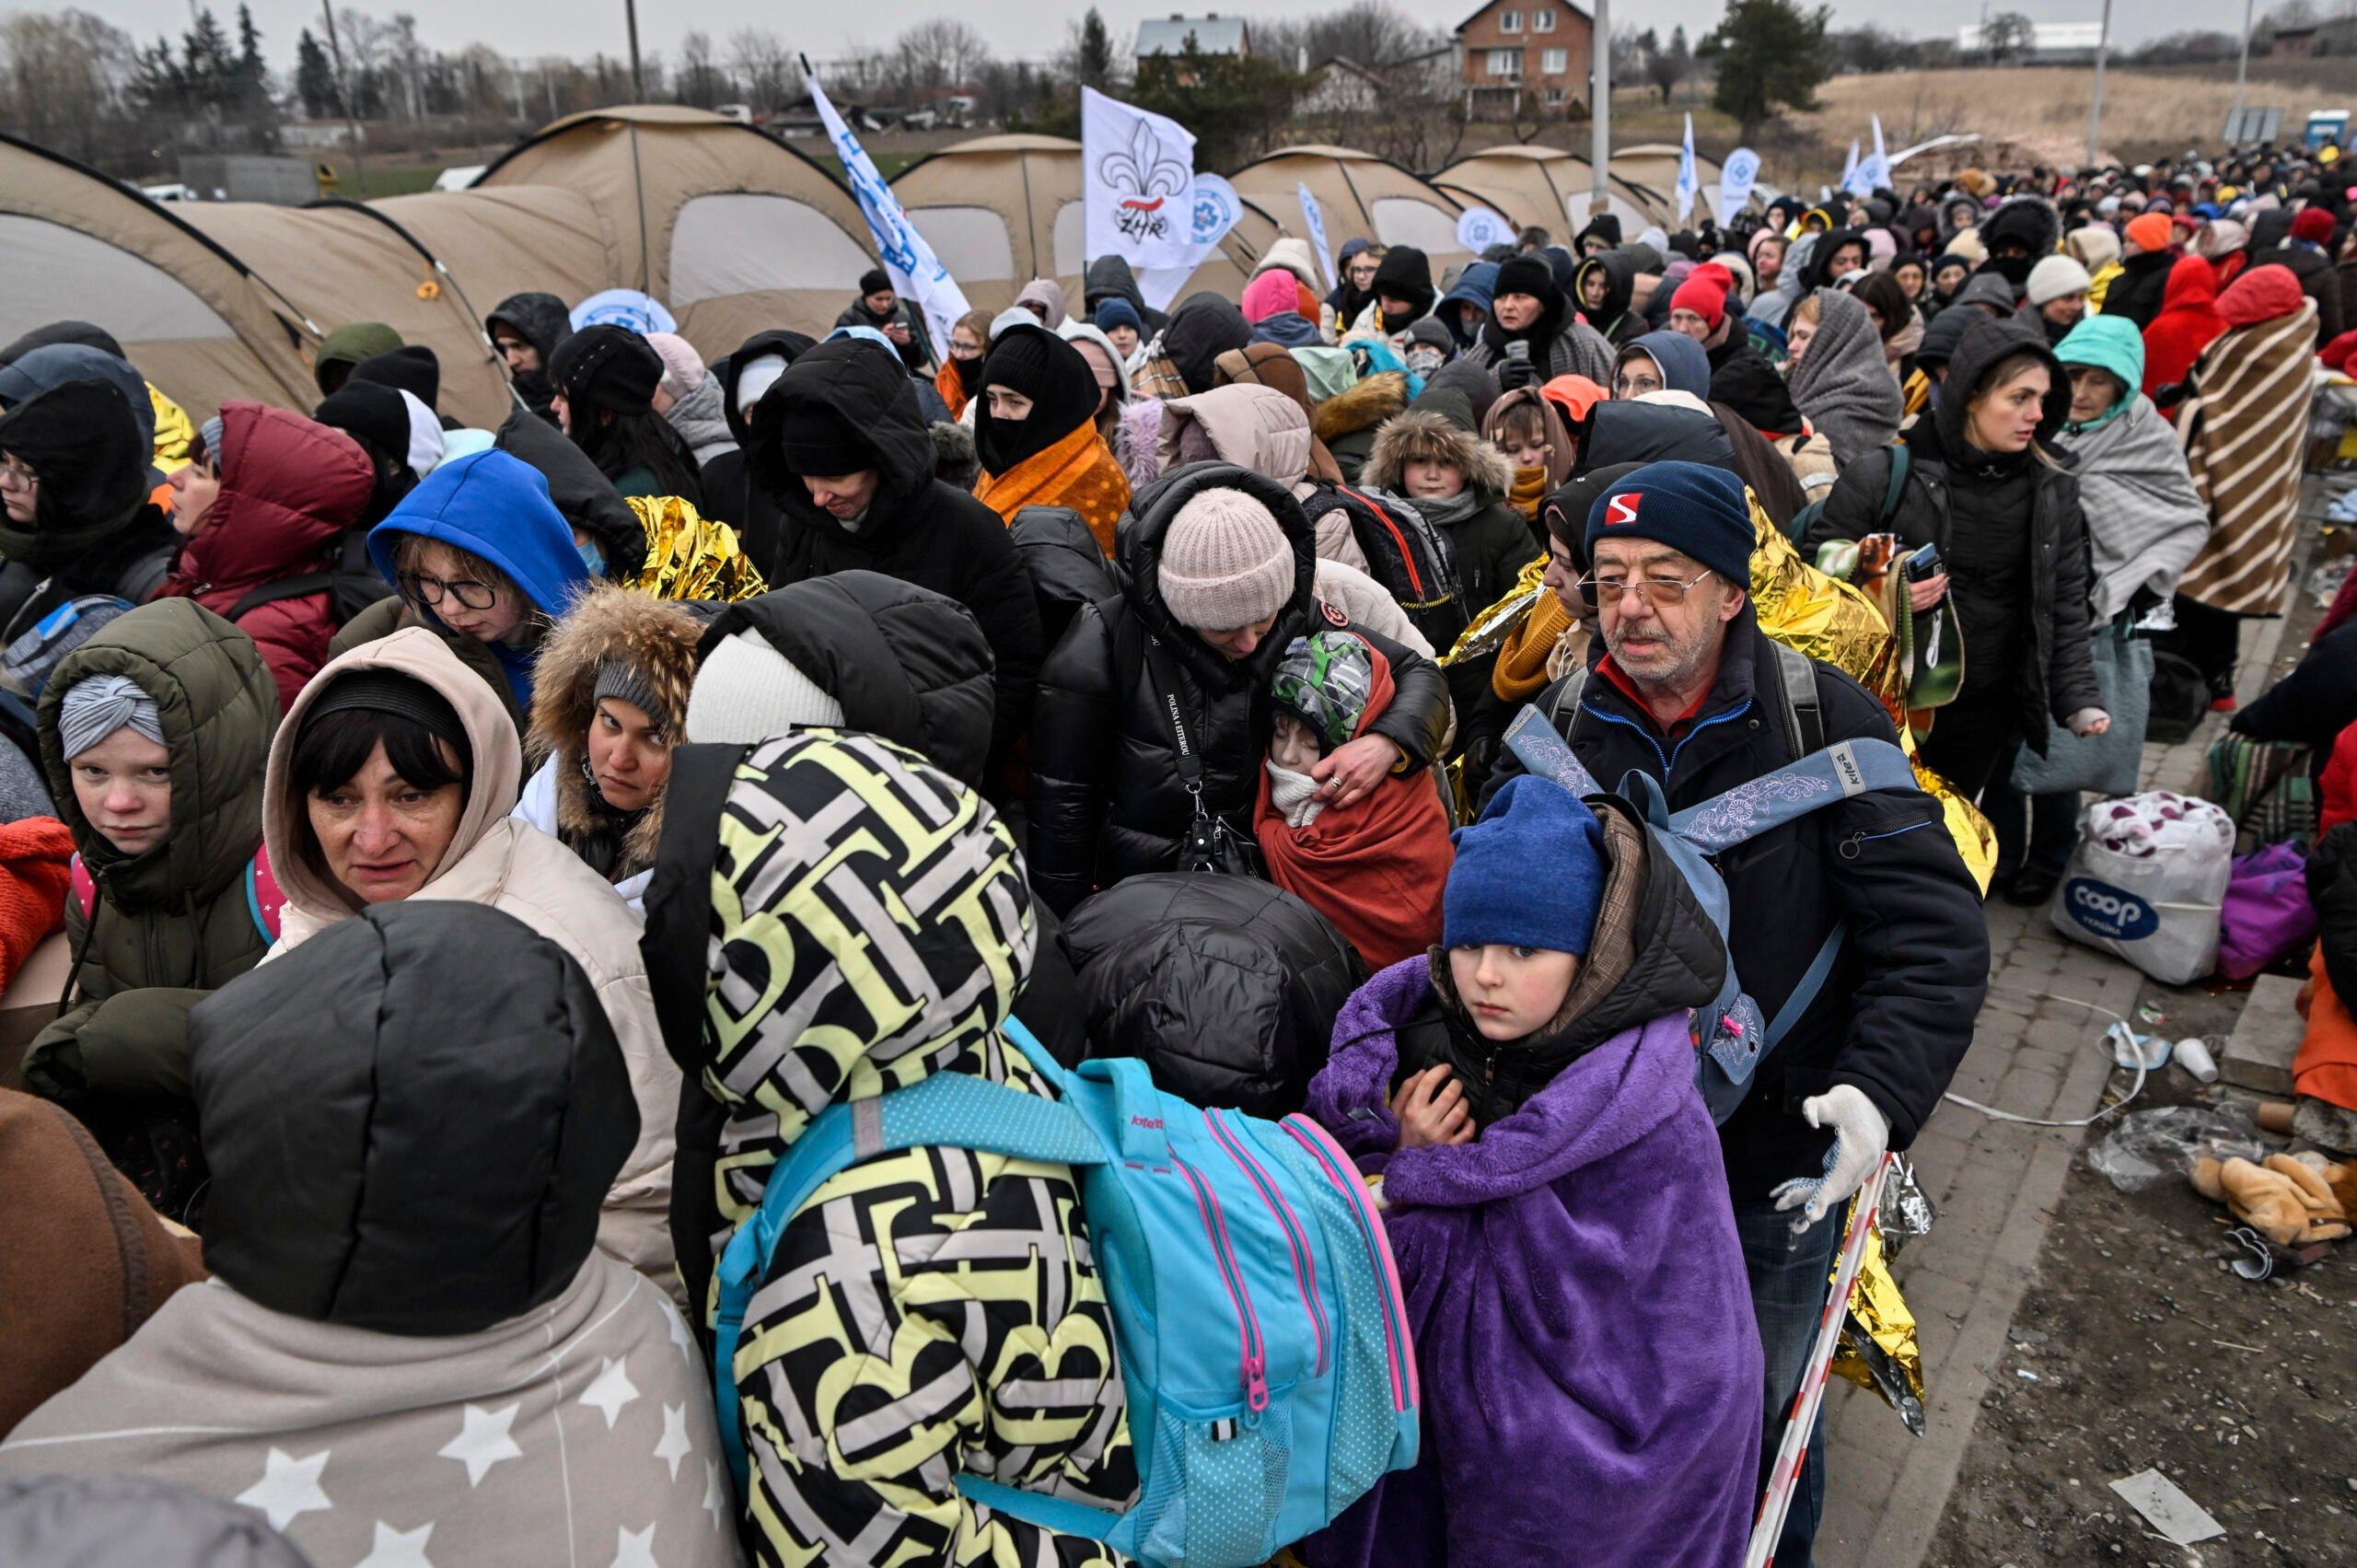 Refugees stand in line in the cold as they wait to be transferred to a train station after crossing the Ukrainian border into Poland, at the Medyka border crossing in Poland, on March 7, 2022. - More than 1.5 million people have fled Ukraine since the start of the Russian invasion, according to the latest UN data on March 6, 2022. (Photo by Louisa GOULIAMAKI / AFP)